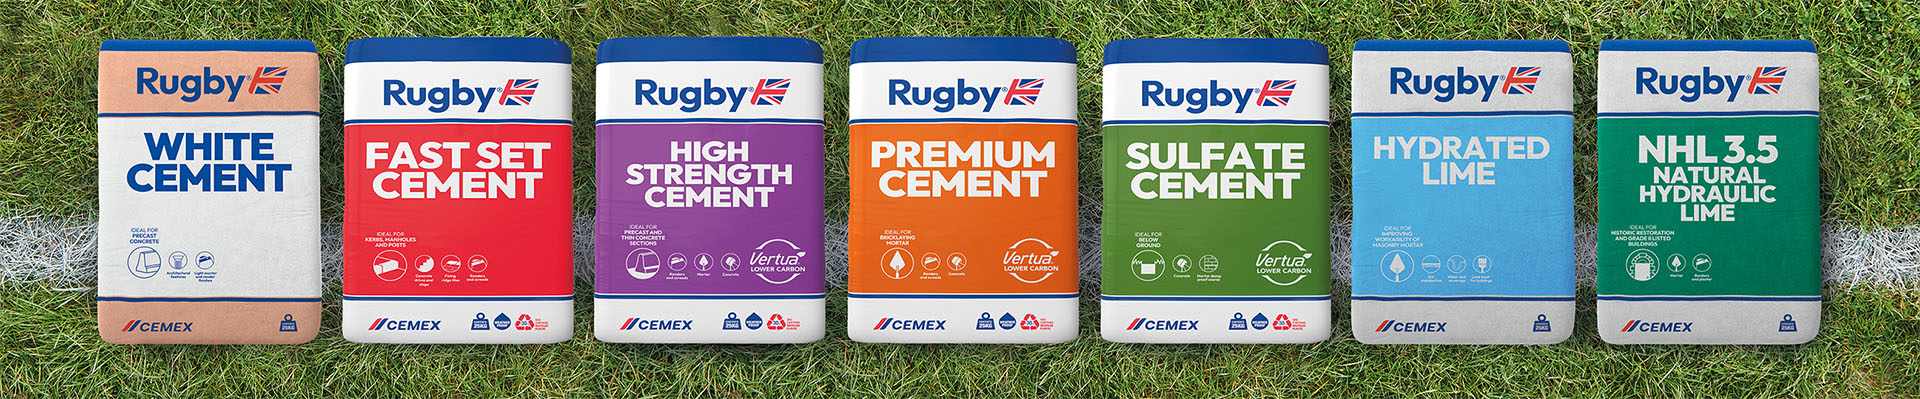 Rugby Cement